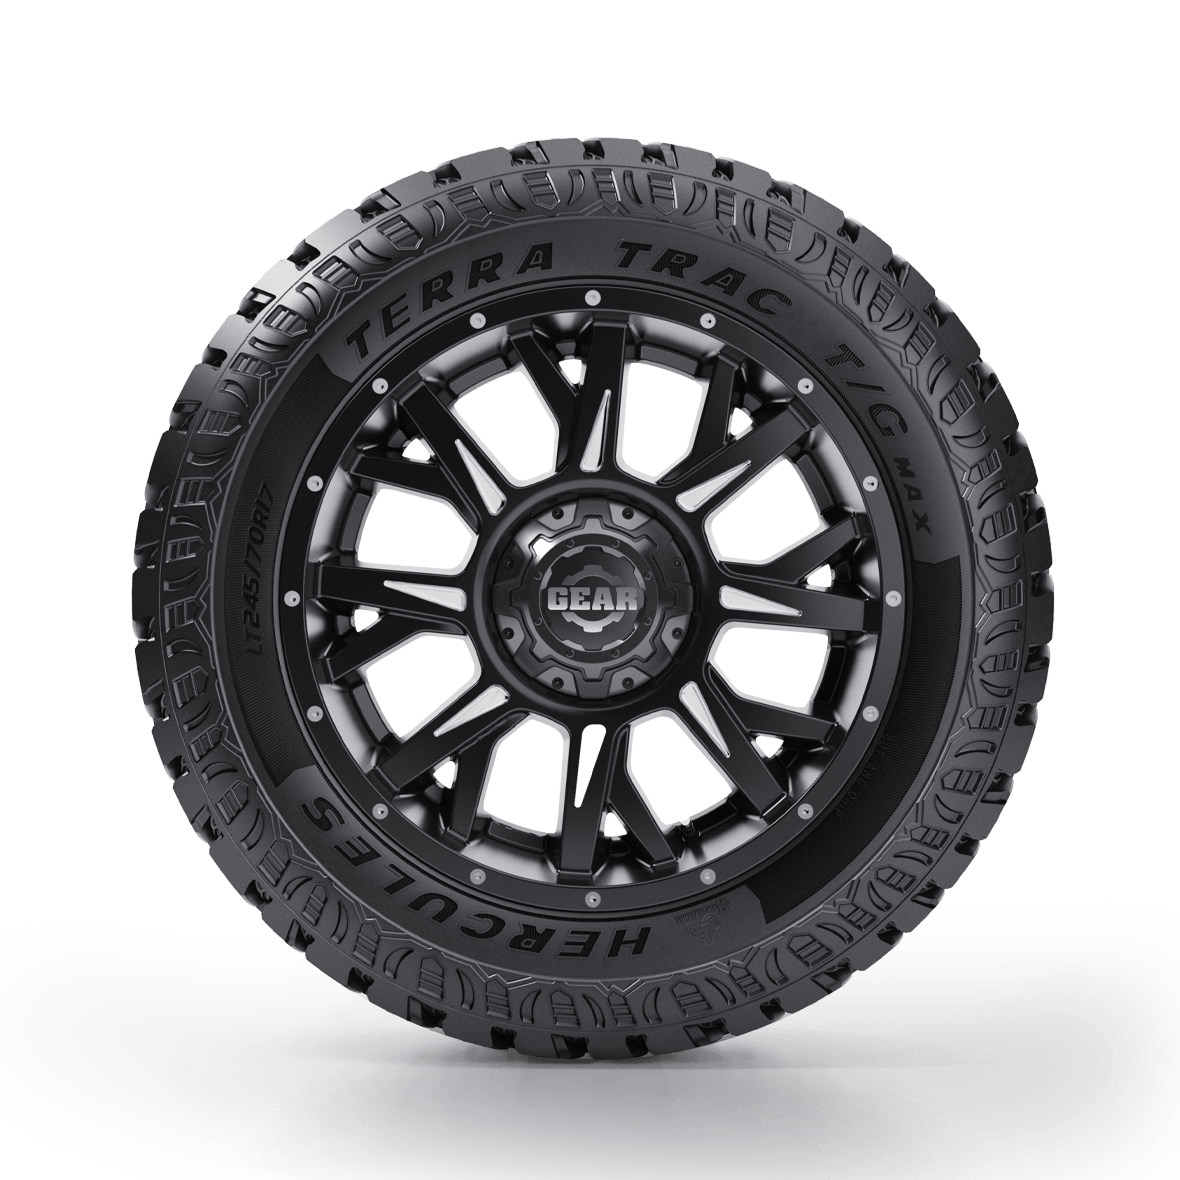 Terra Trac® TG Max | Tires by Name